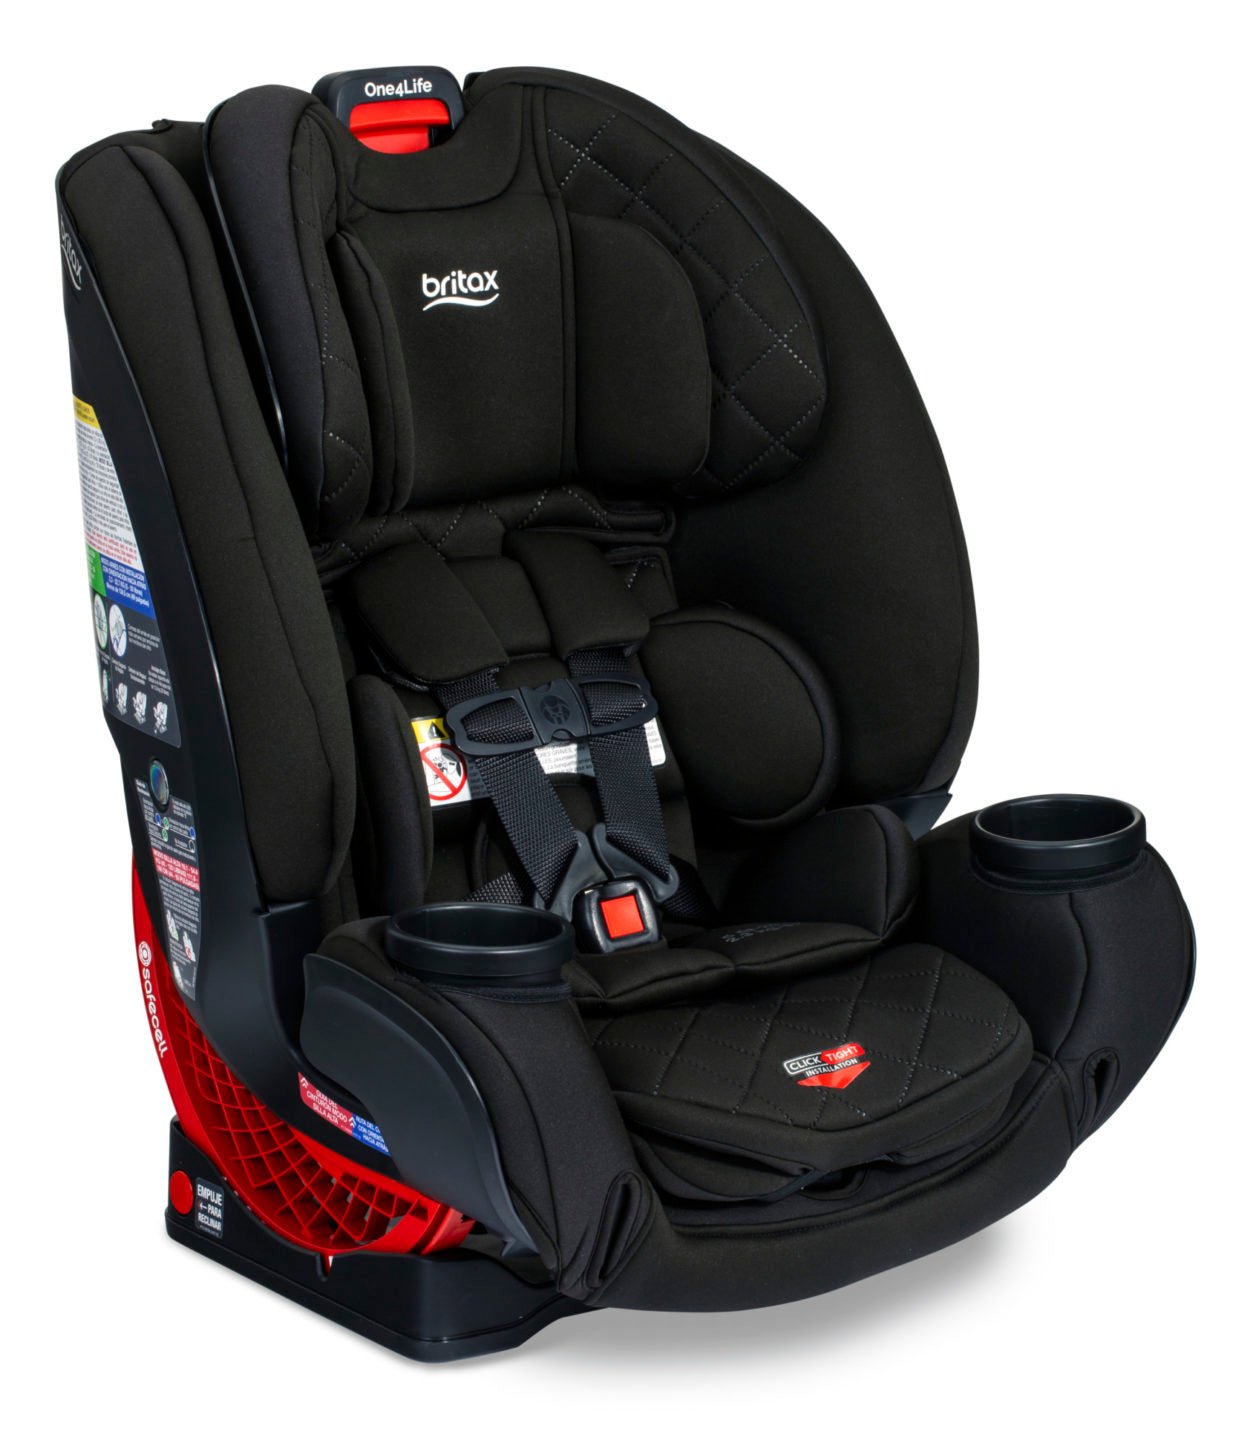 BRITAX One4Life ClickTight All-in-One Convertible Car Seat - ANB Baby -652182742638$300 - $500